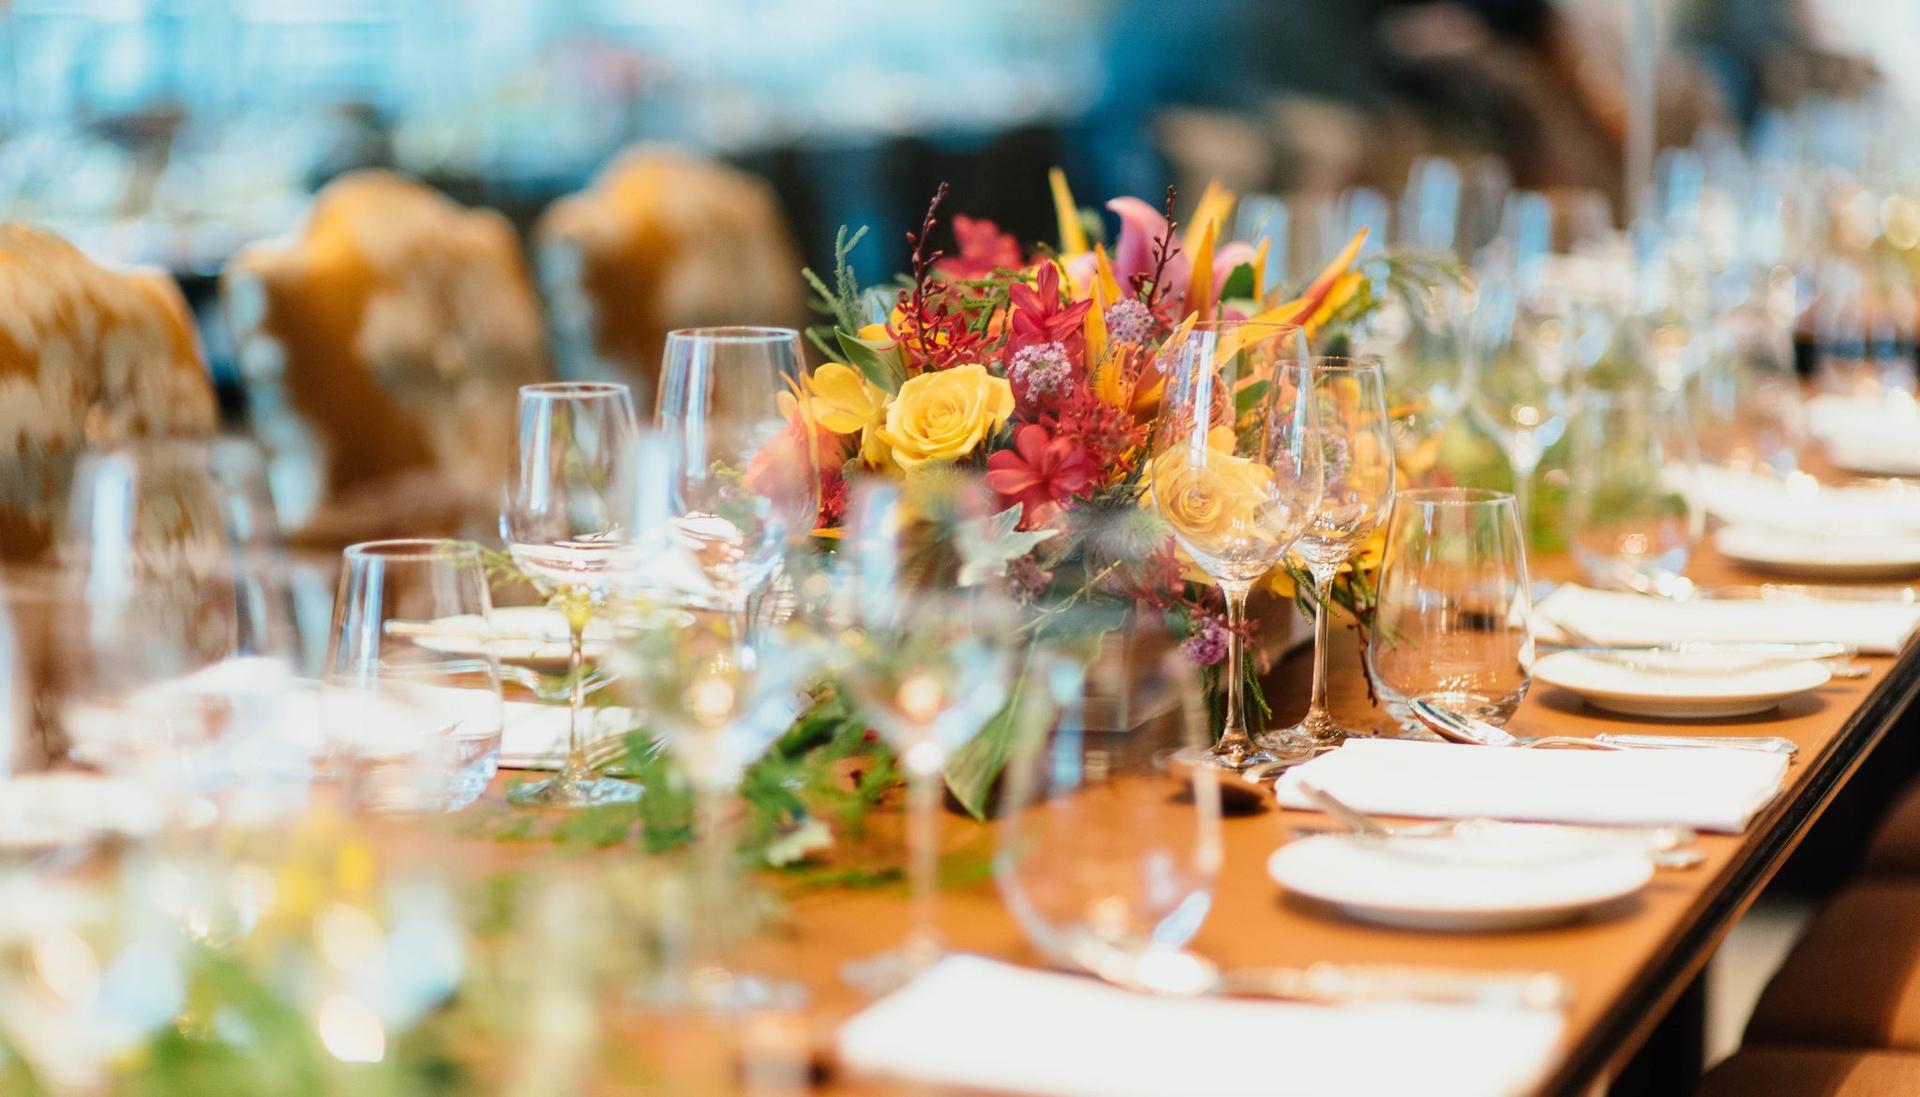 table with flowers and glassware, laid out for an event